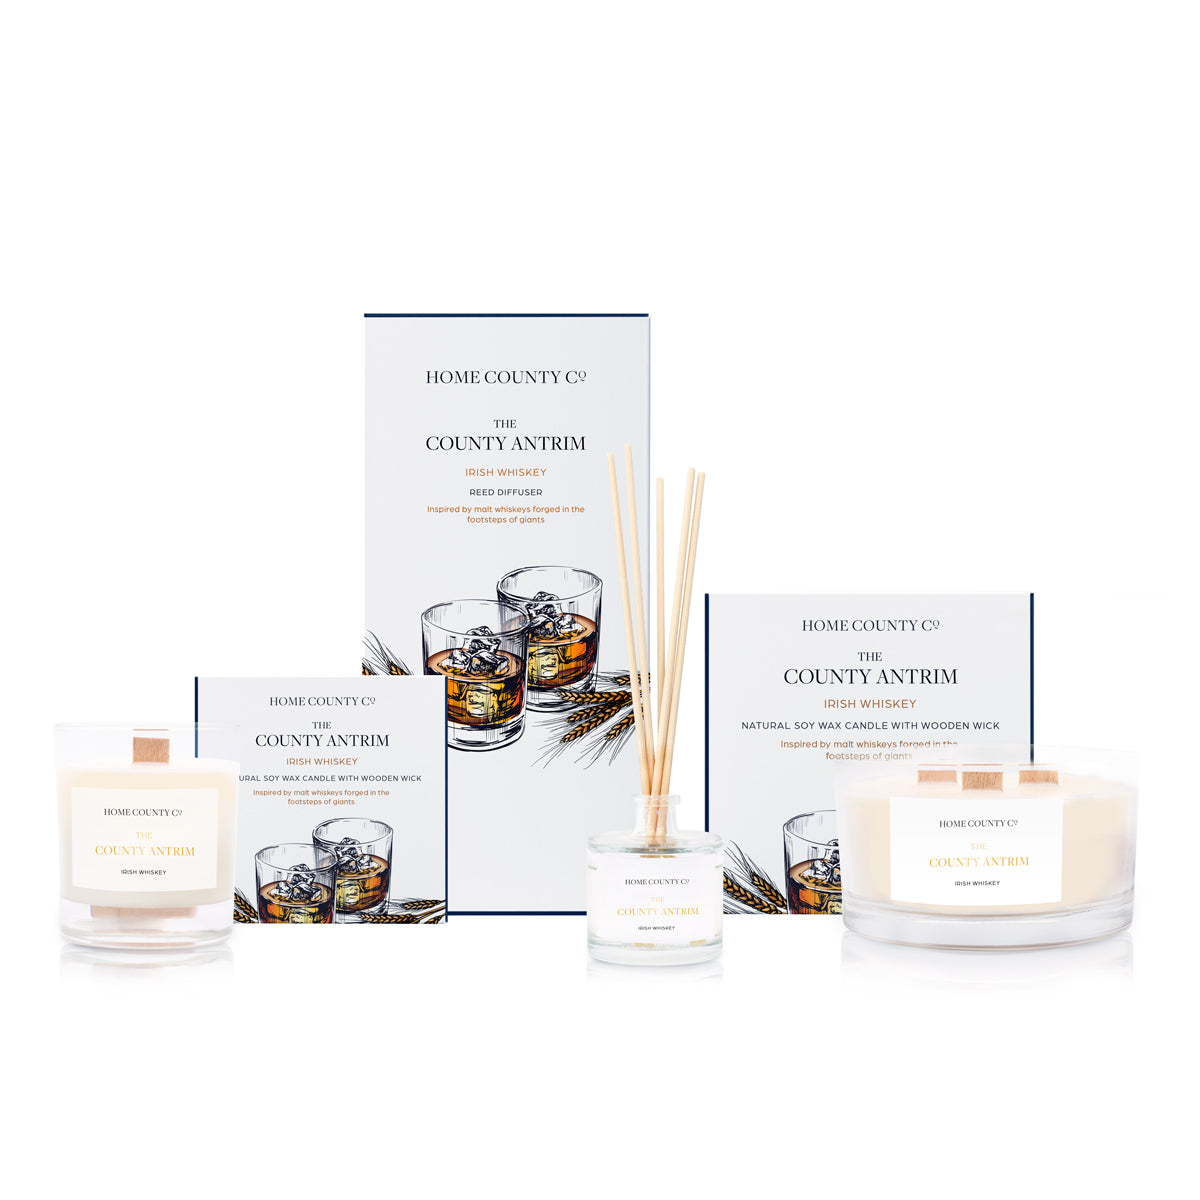 The County Antrim Irish Whiskey scented home fragrance collection from the Home County Co,